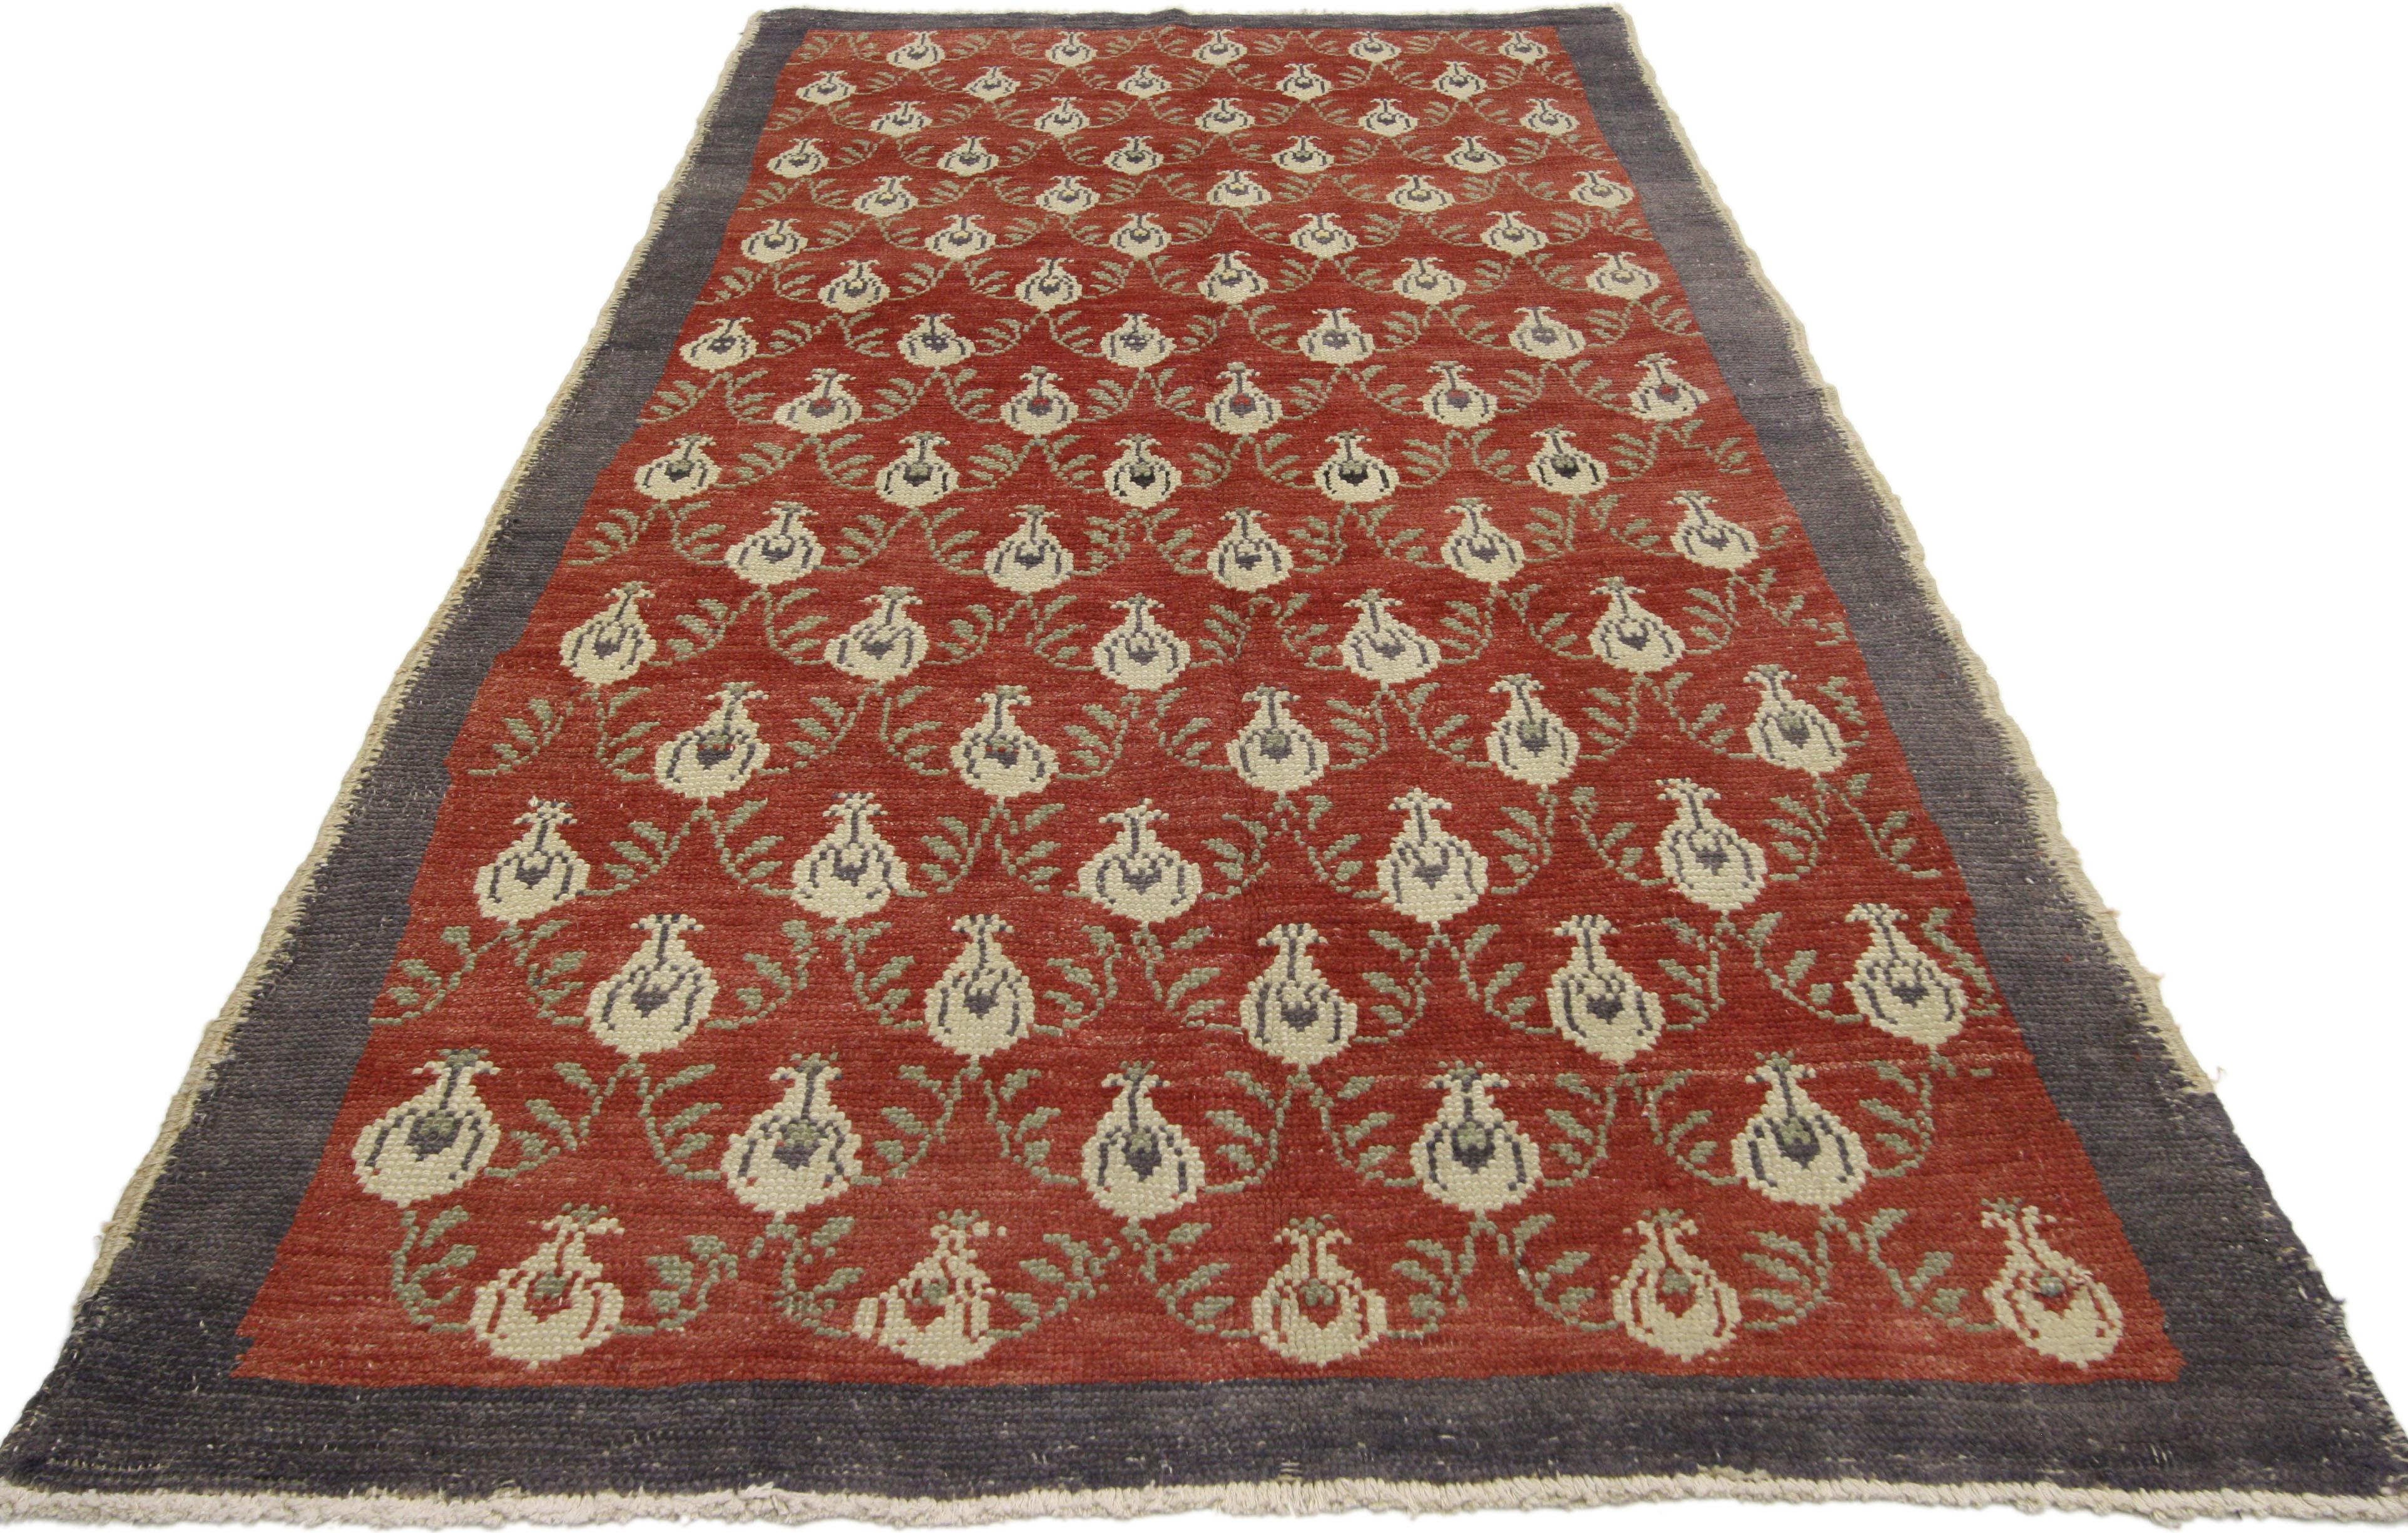 51309, vintage Turkish Oushak rug with Romantic Craftsman style. This hand knotted wool vintage Turkish Oushak rug features a floral lattice patter of budding tulips spread across an abrashed brick red field. Curving leafy vines connect the